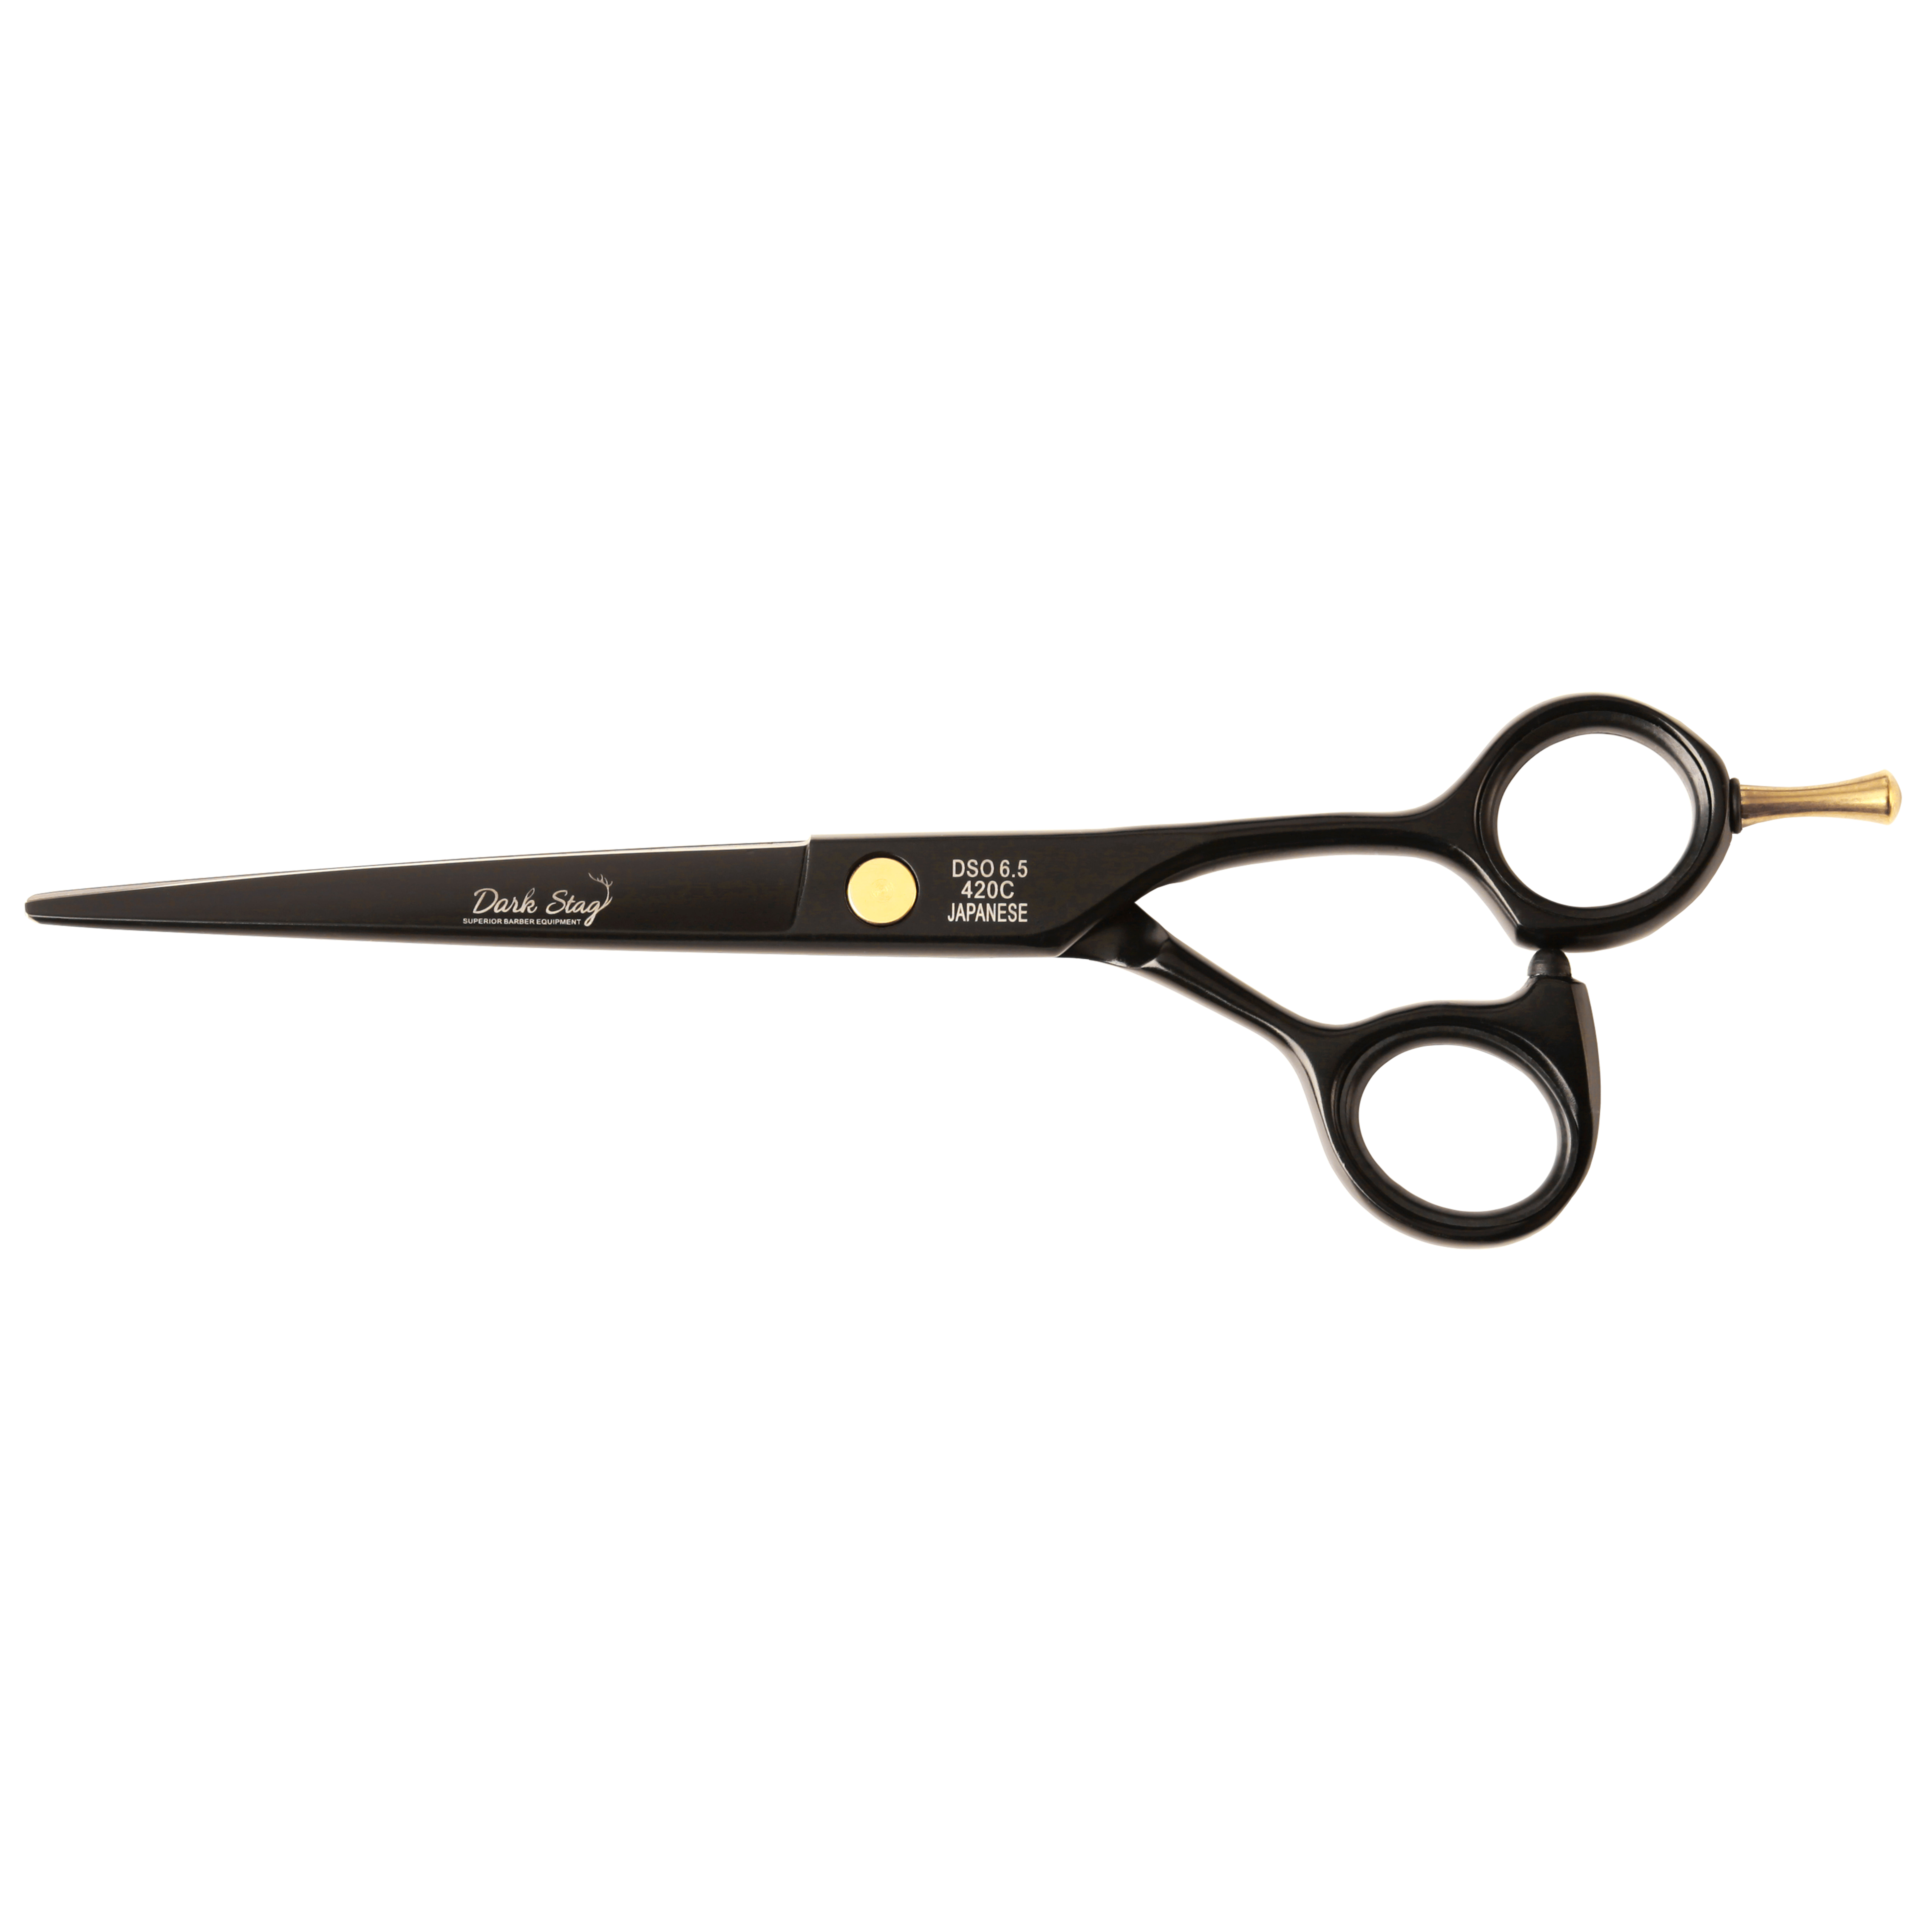 The Dark Stag DSO Black and Gold Barber Scissor